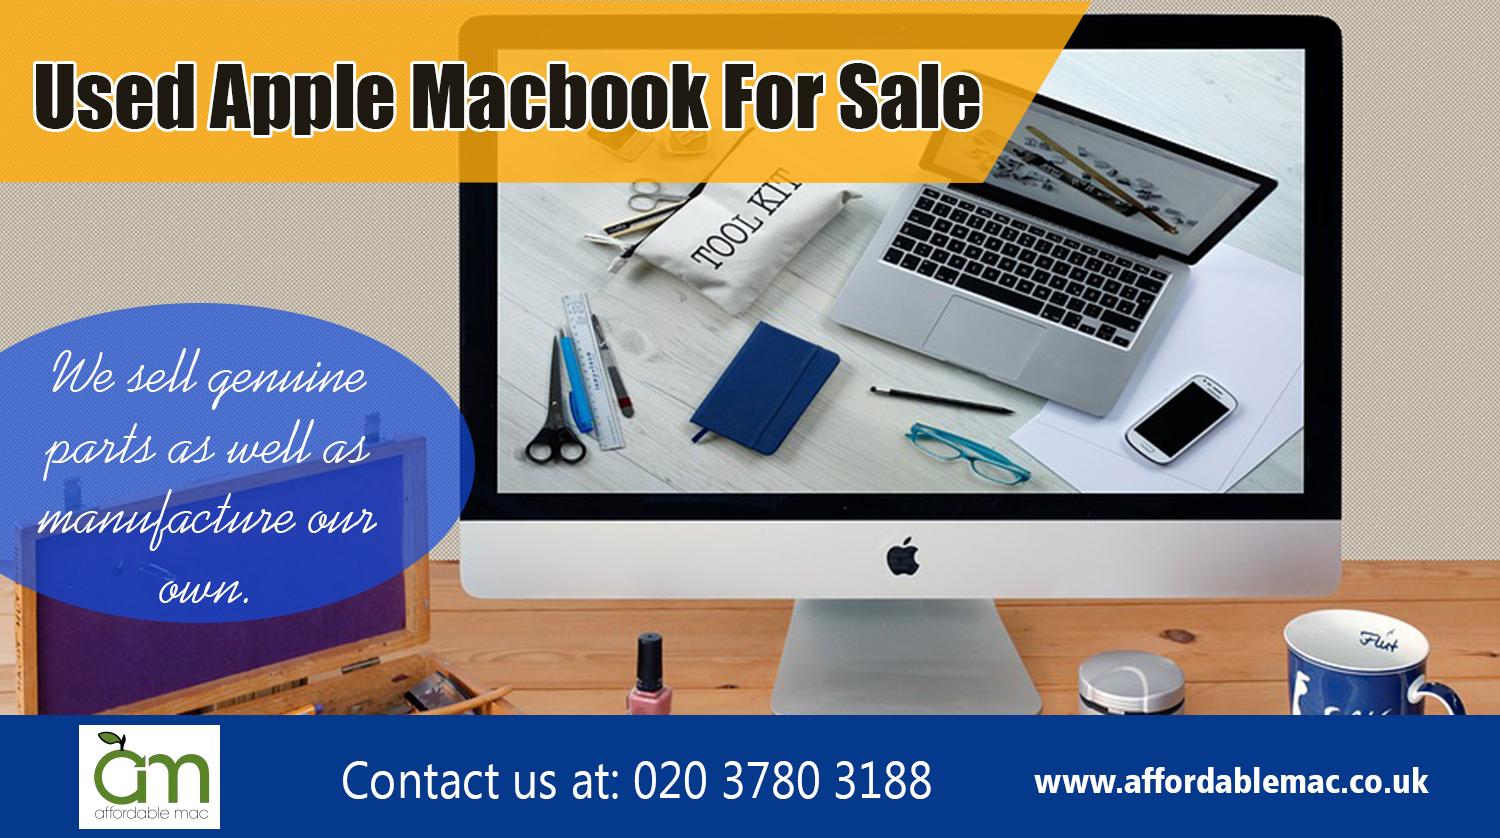 Used Apple Macbook For Sale